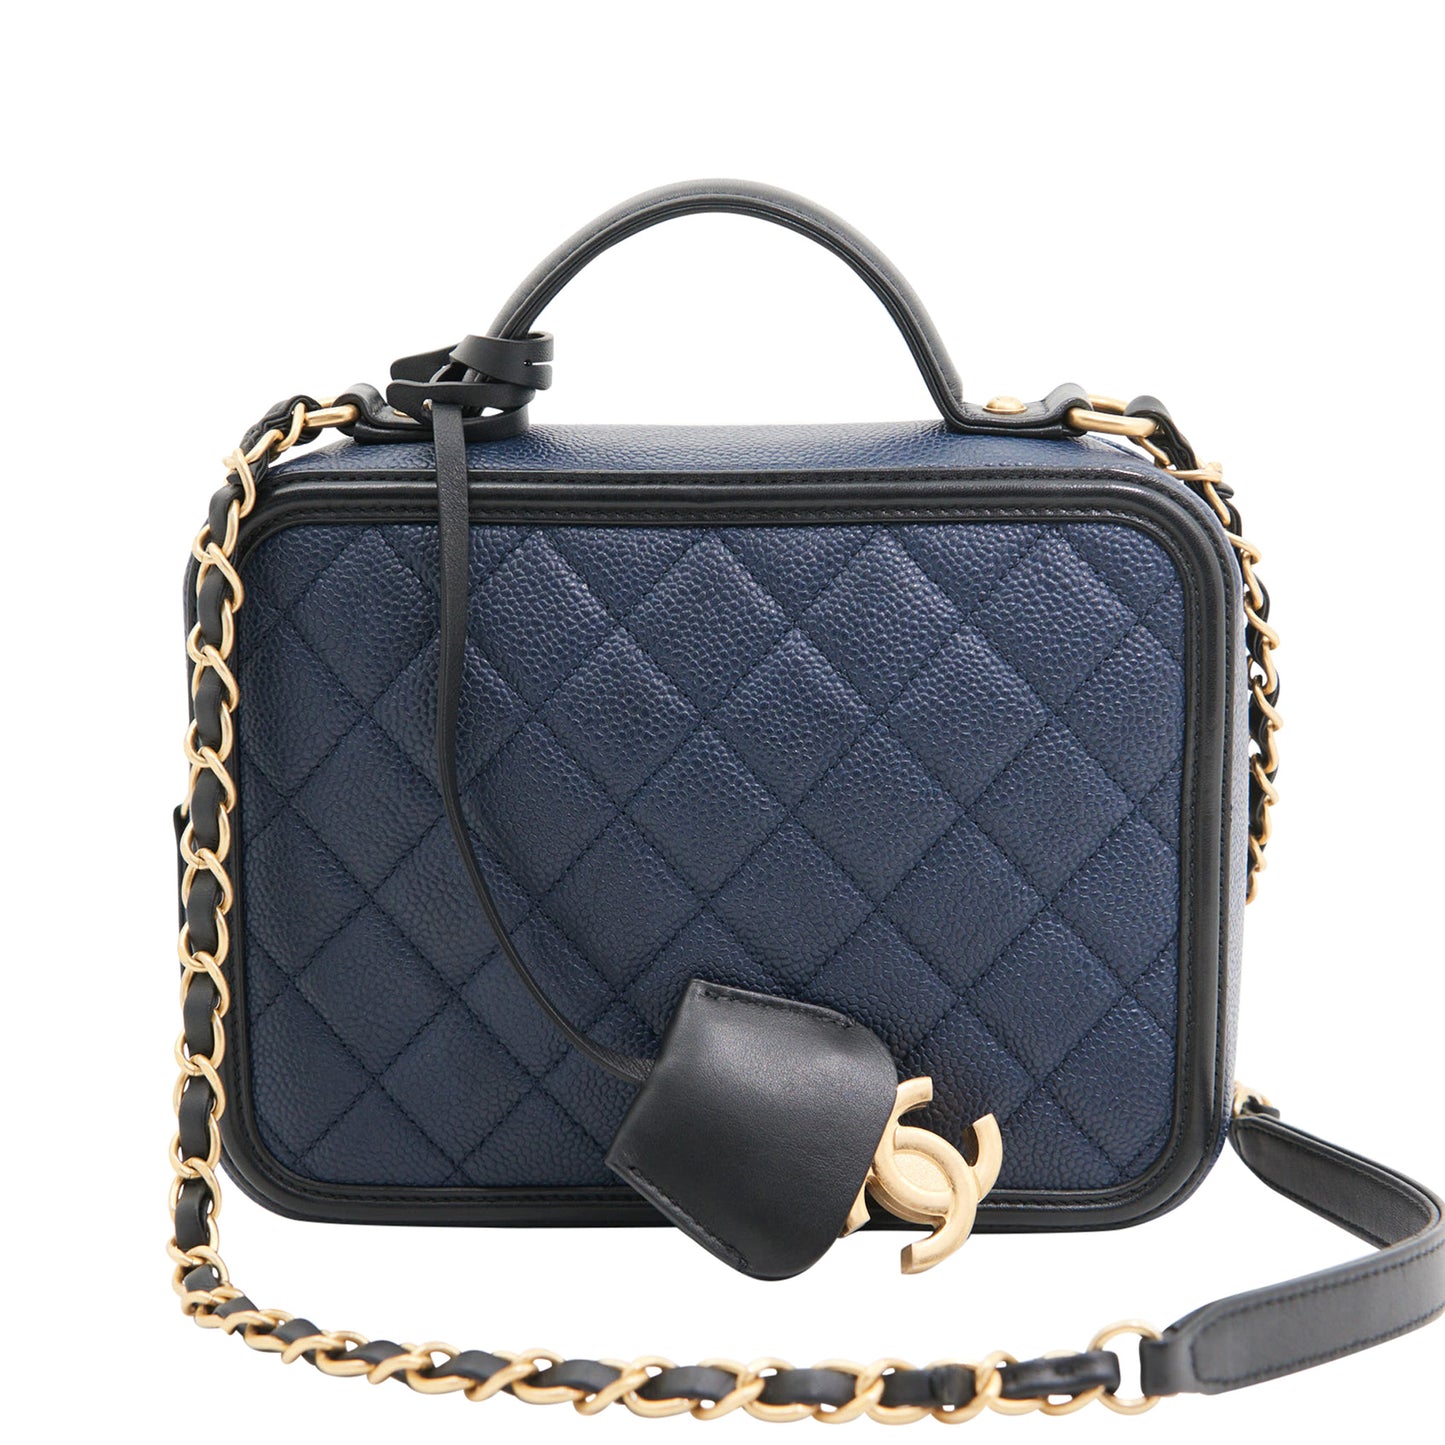 Chanel Caviar Quilted Handbag in Navy GHW